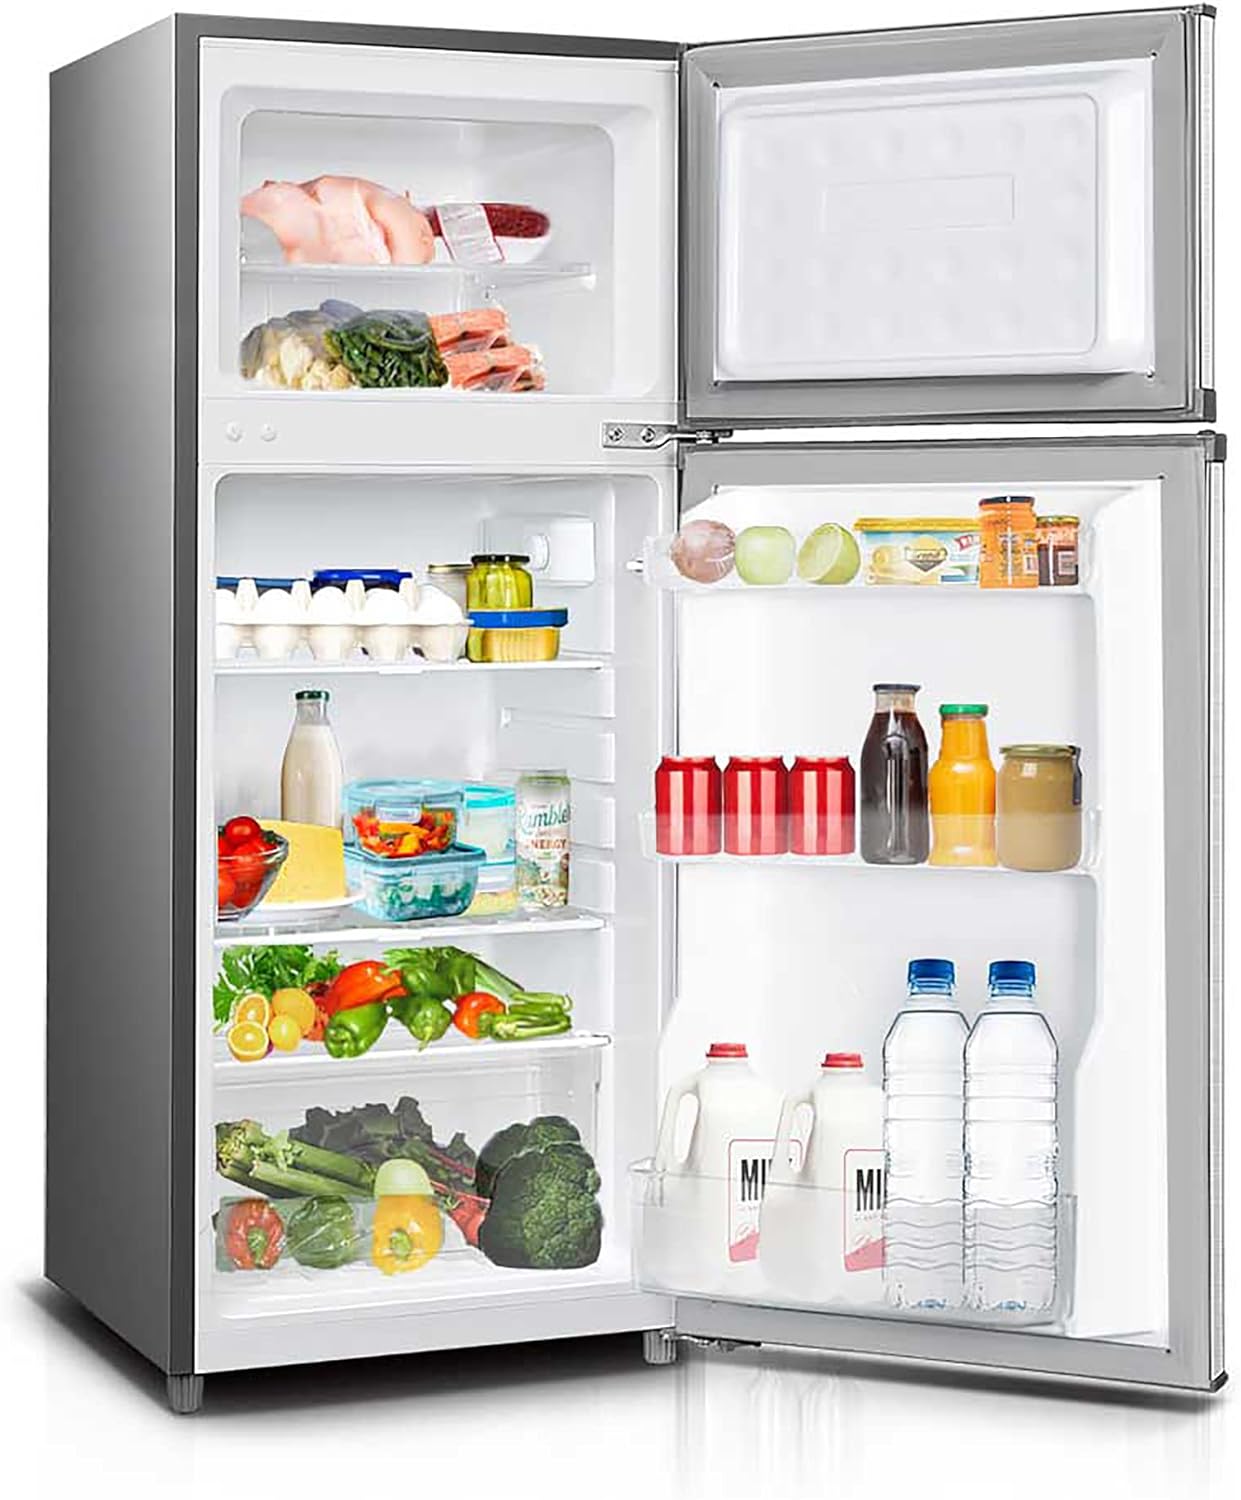 2-Gig RC-2450SLG 4.5 cu. ft. Compact Mini Refrigerator with Top Mount Freezer - image 4 of 5